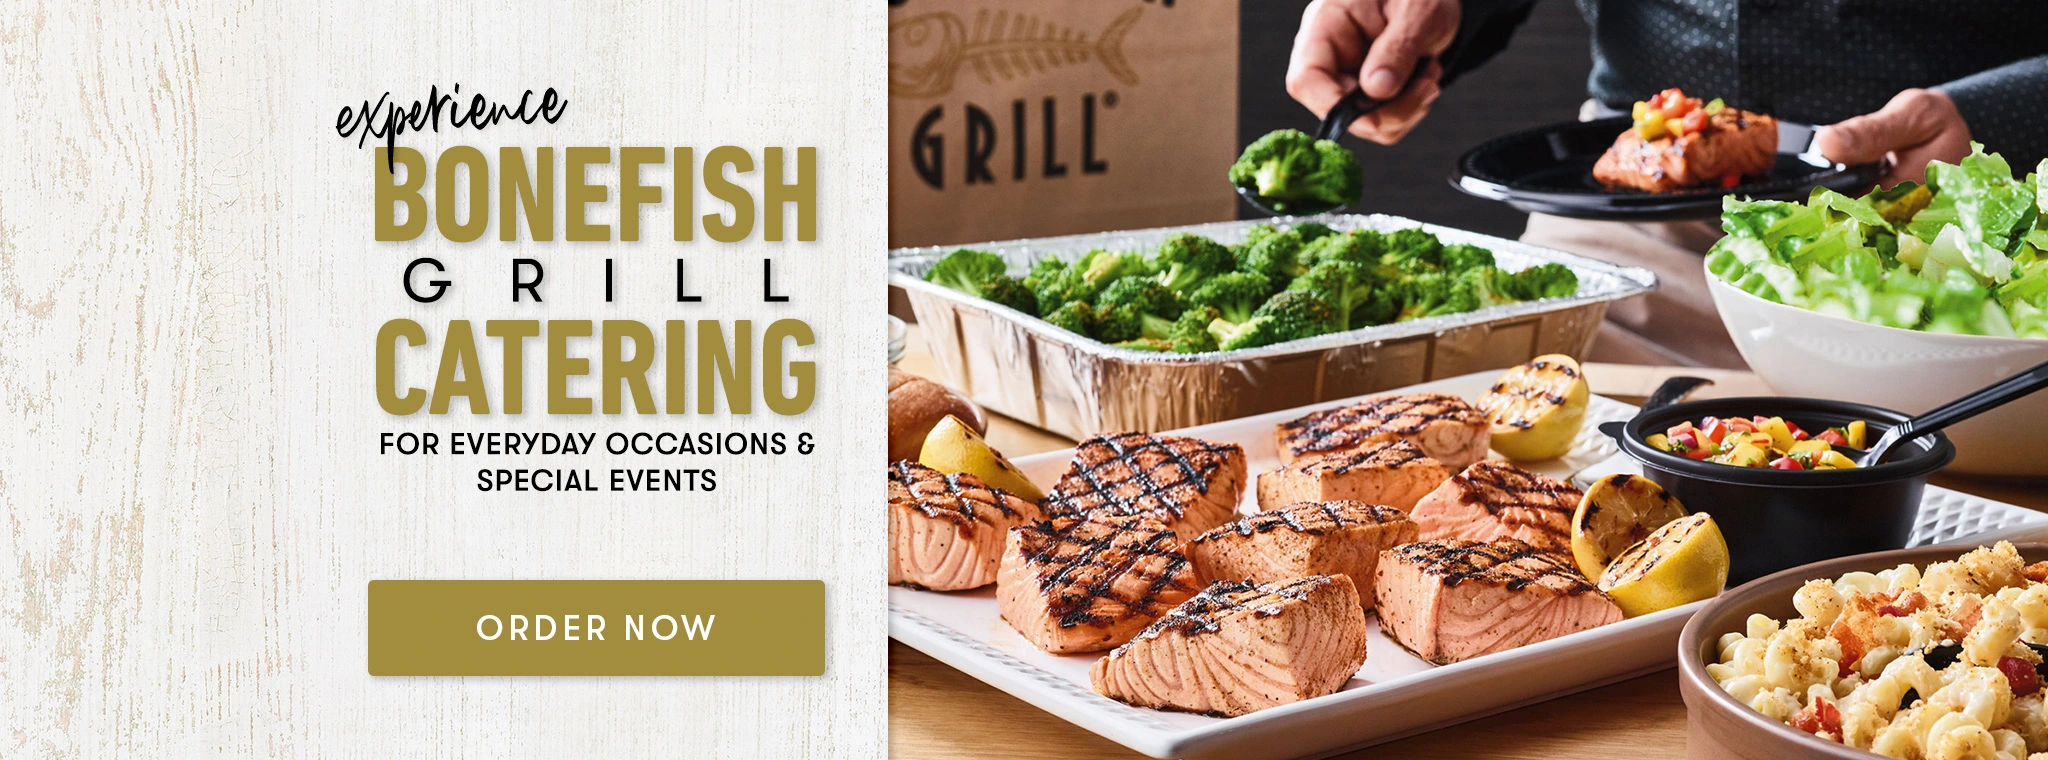 bonefish grill catering banner